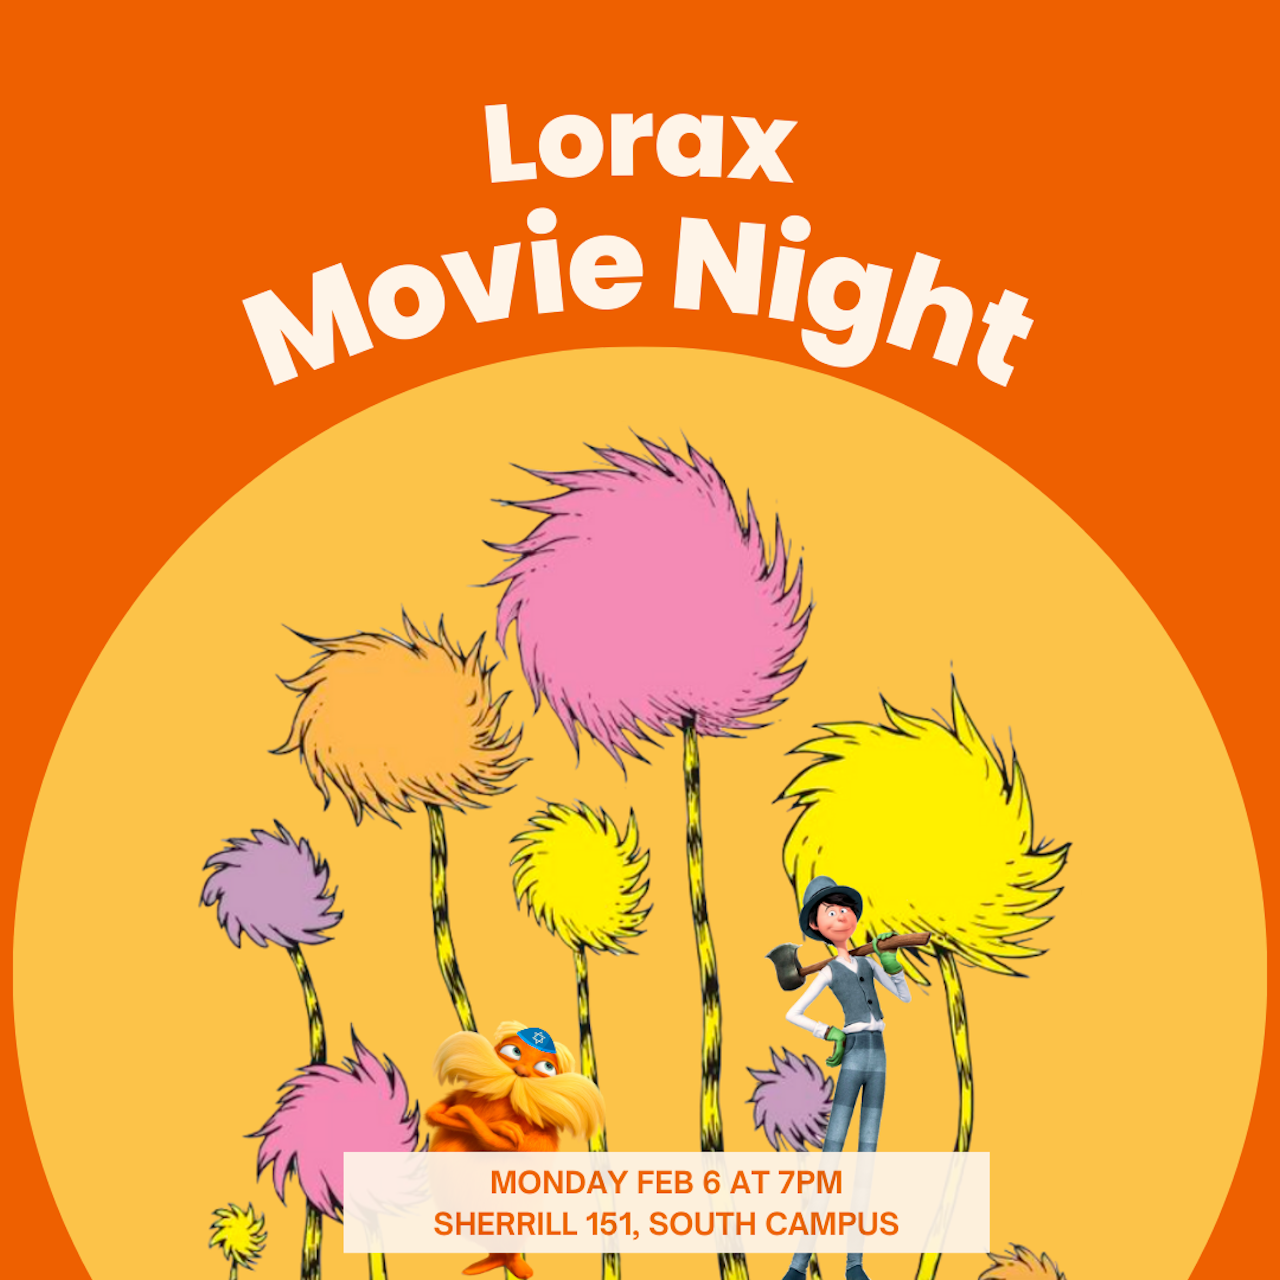 An orange poster with the title "Lorax Movie Night" over a yellow circle with pink, purple, yellow, and light orange truffula trees, the lorax, and the onceler.